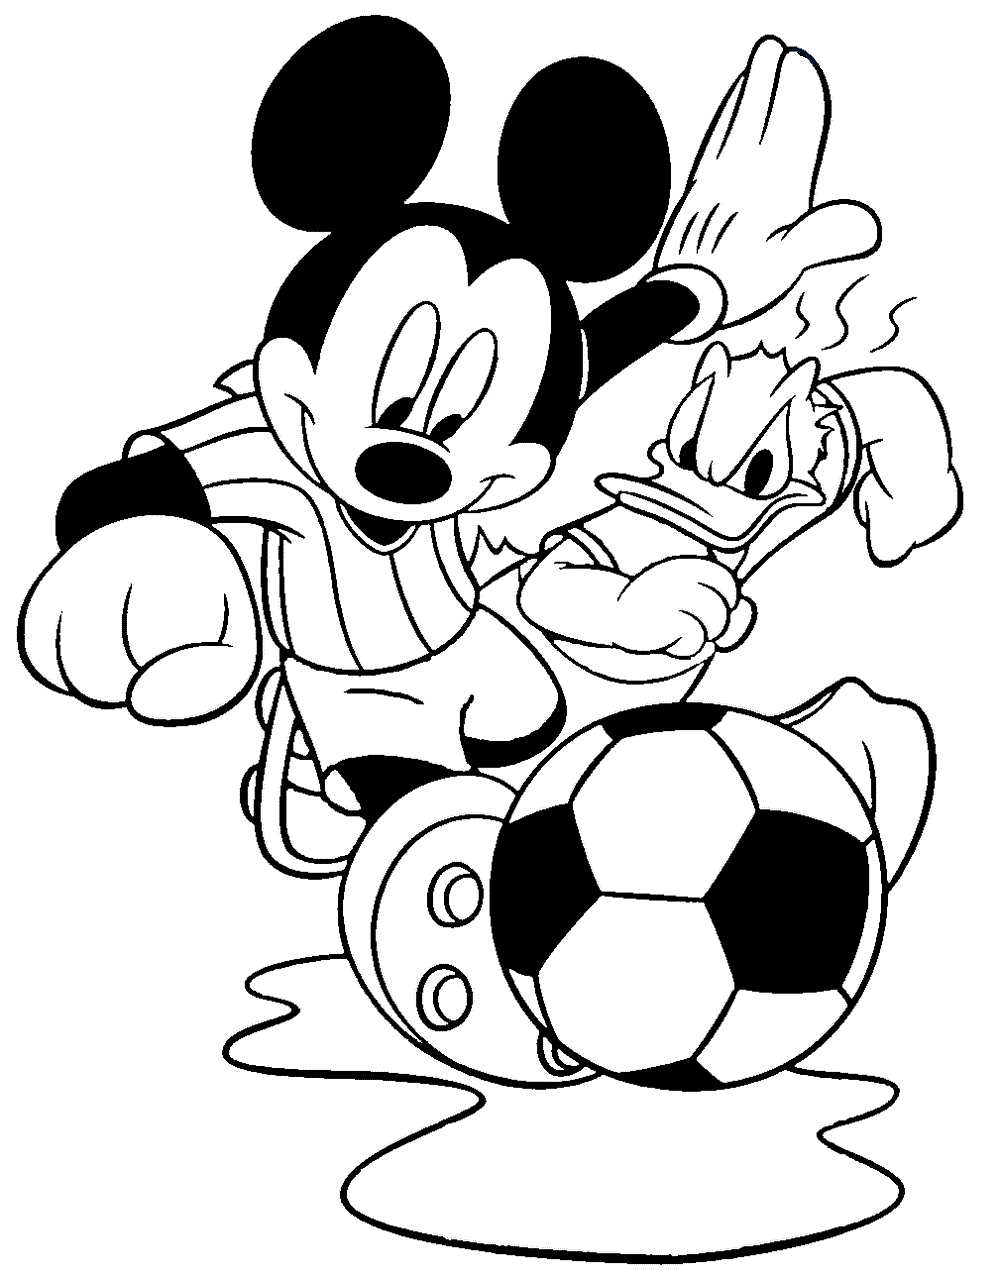 mickey vs donald soccer coloring page